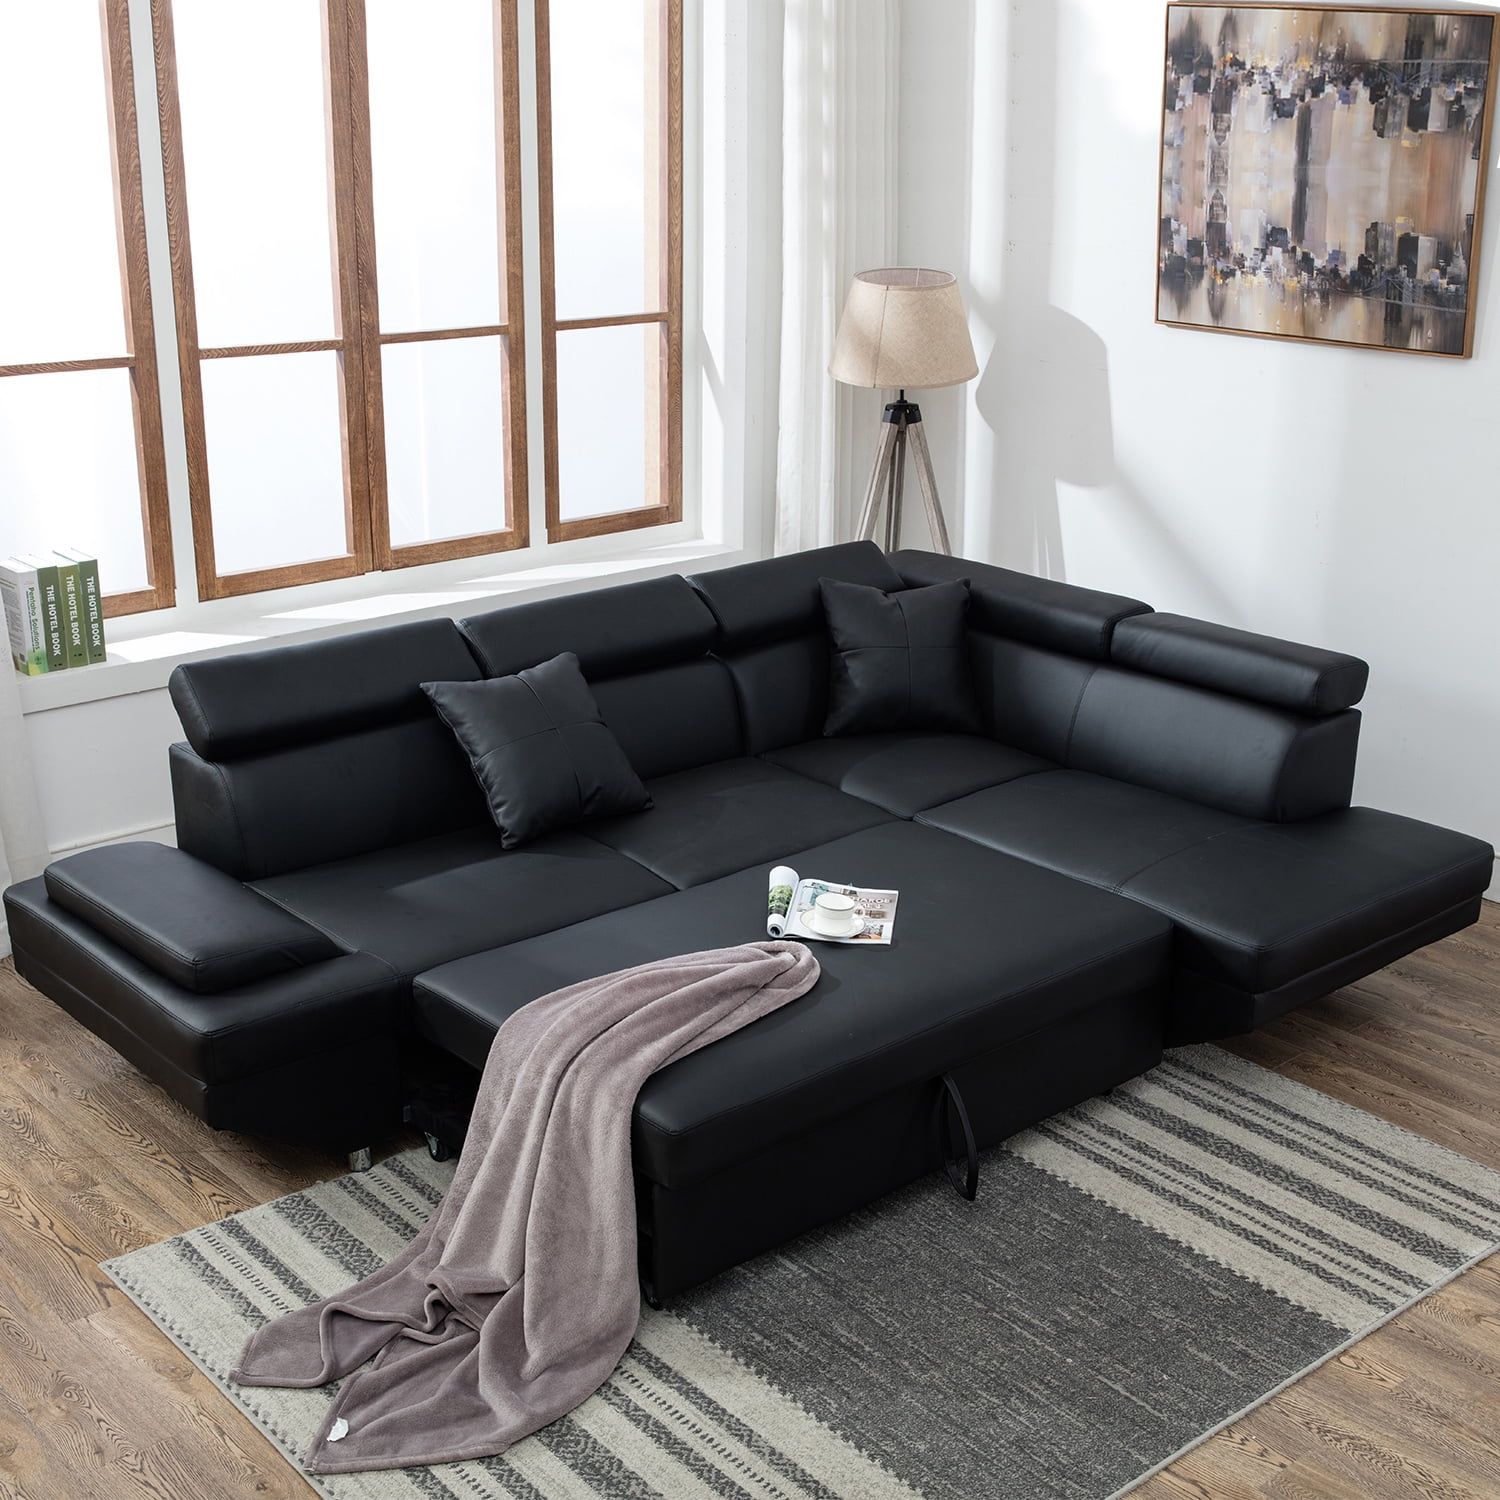 Contemporary Sectional Modern Sofa Bed – Black With Functional Armrest Intended For Sofas In Black (Gallery 20 of 20)